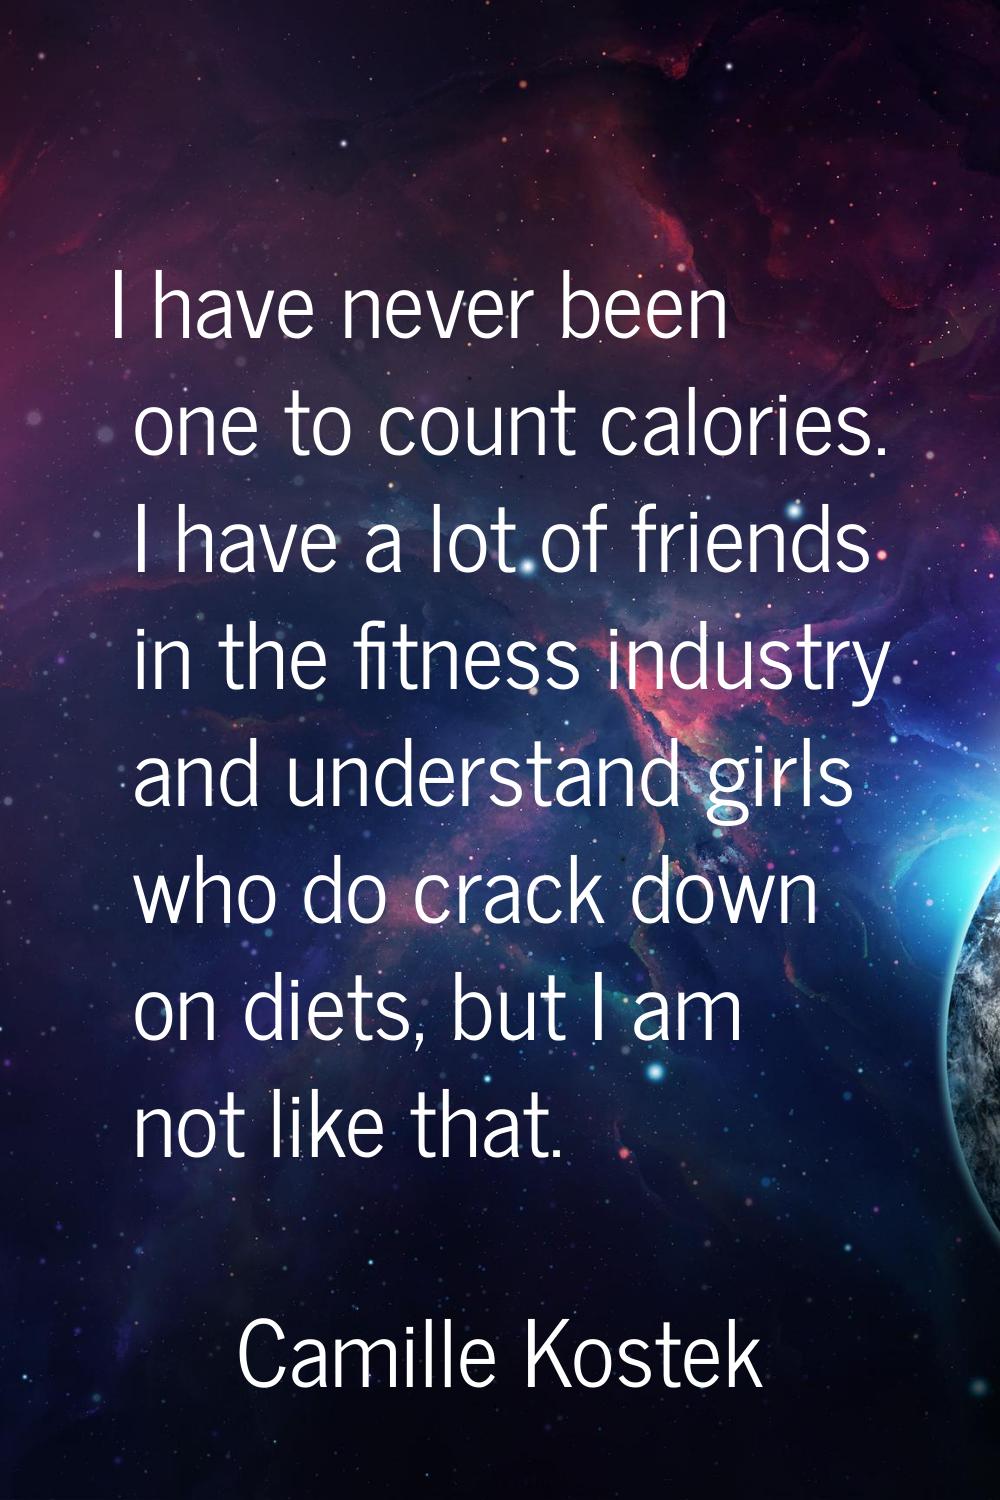 I have never been one to count calories. I have a lot of friends in the fitness industry and unders